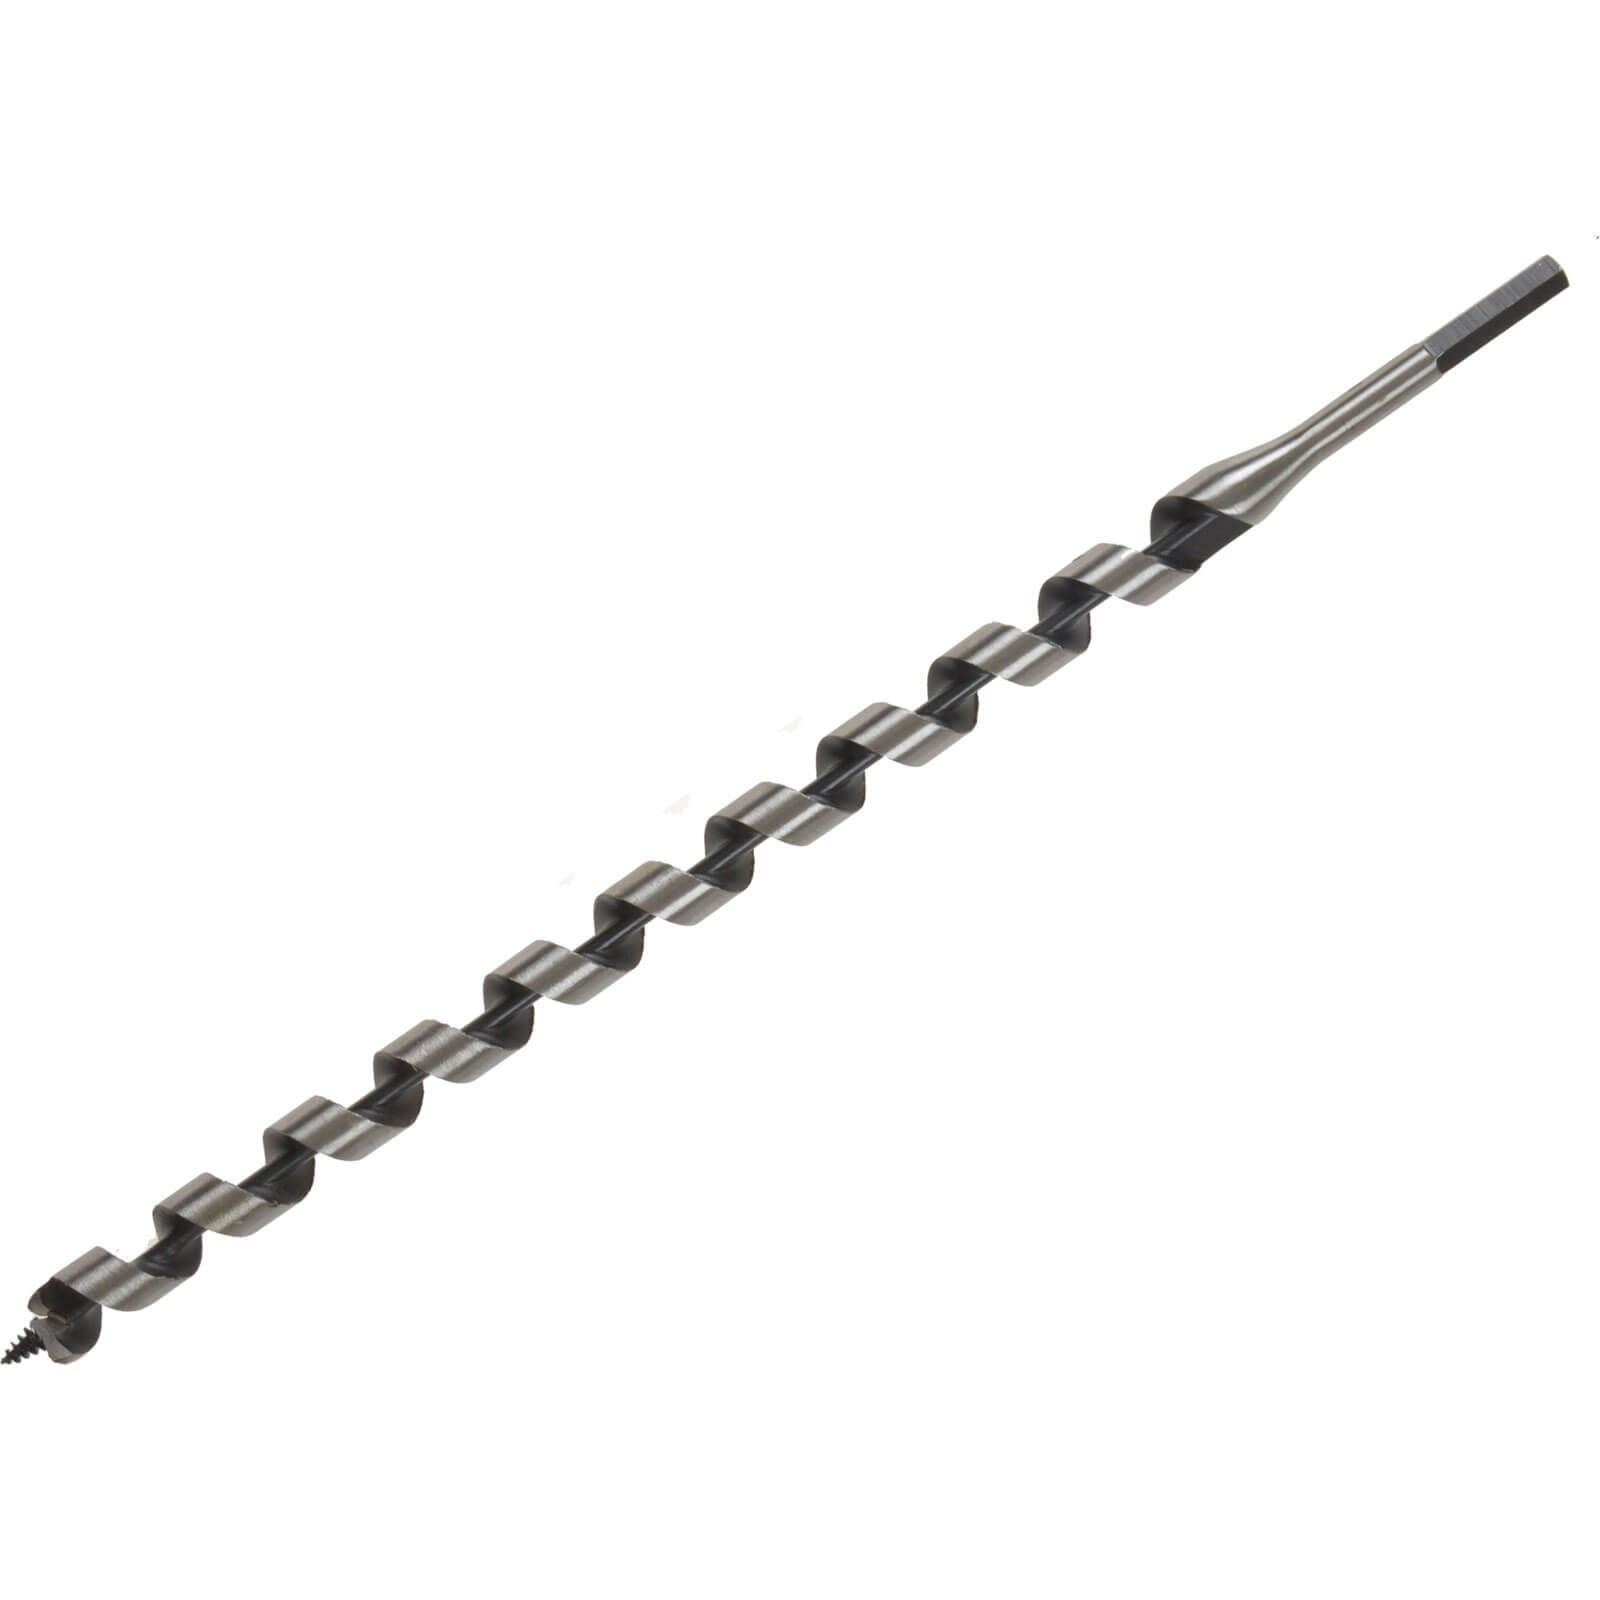 Image of Irwin Wood Auger Drill Bit 20mm 400mm